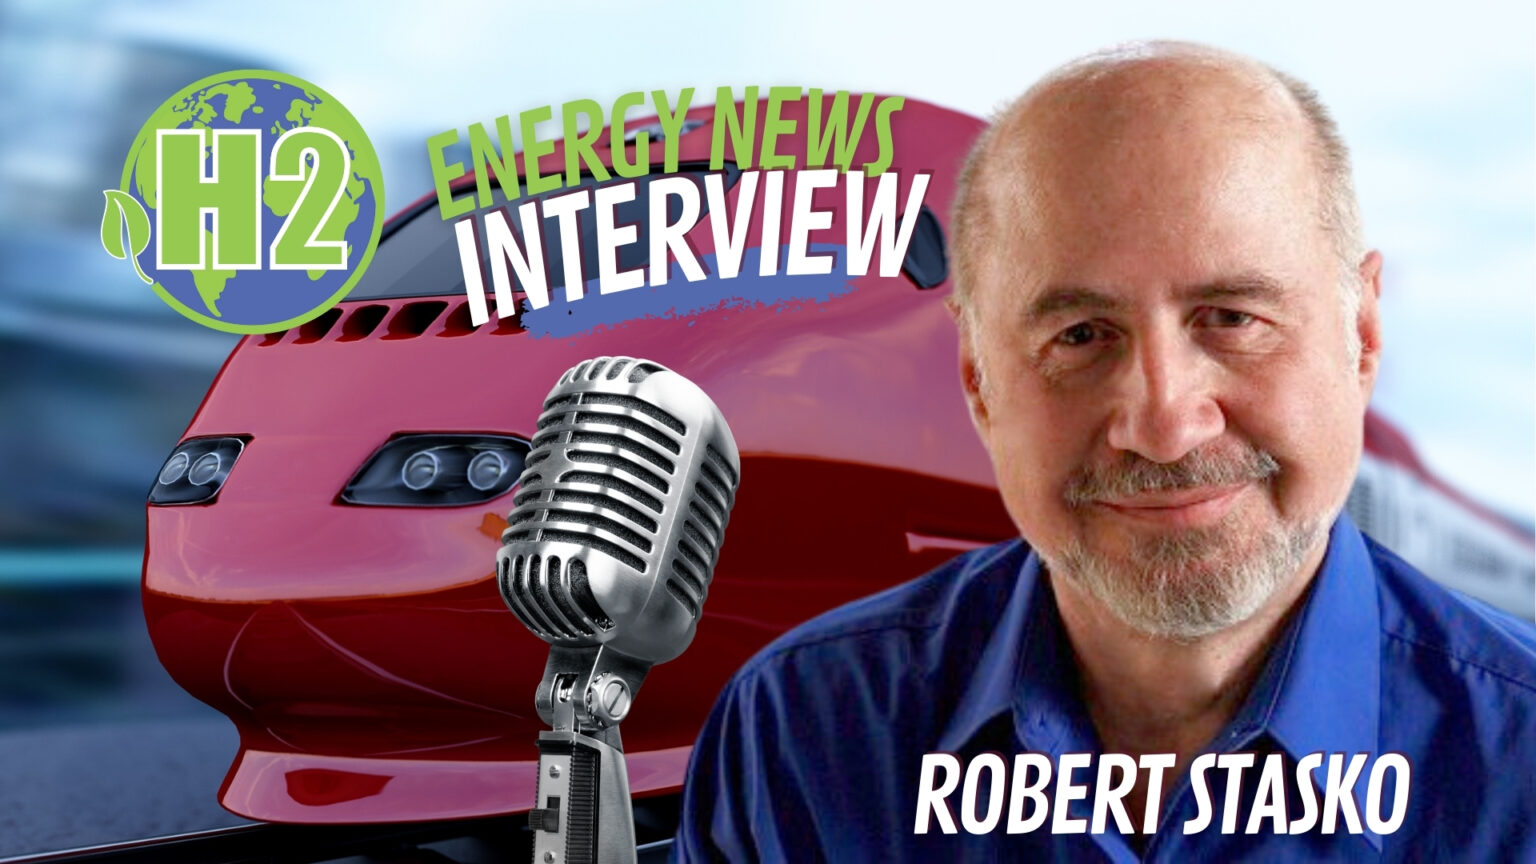 Time to Rethink our Business Models That are 100 Years Old, Interview with Robert Stasko